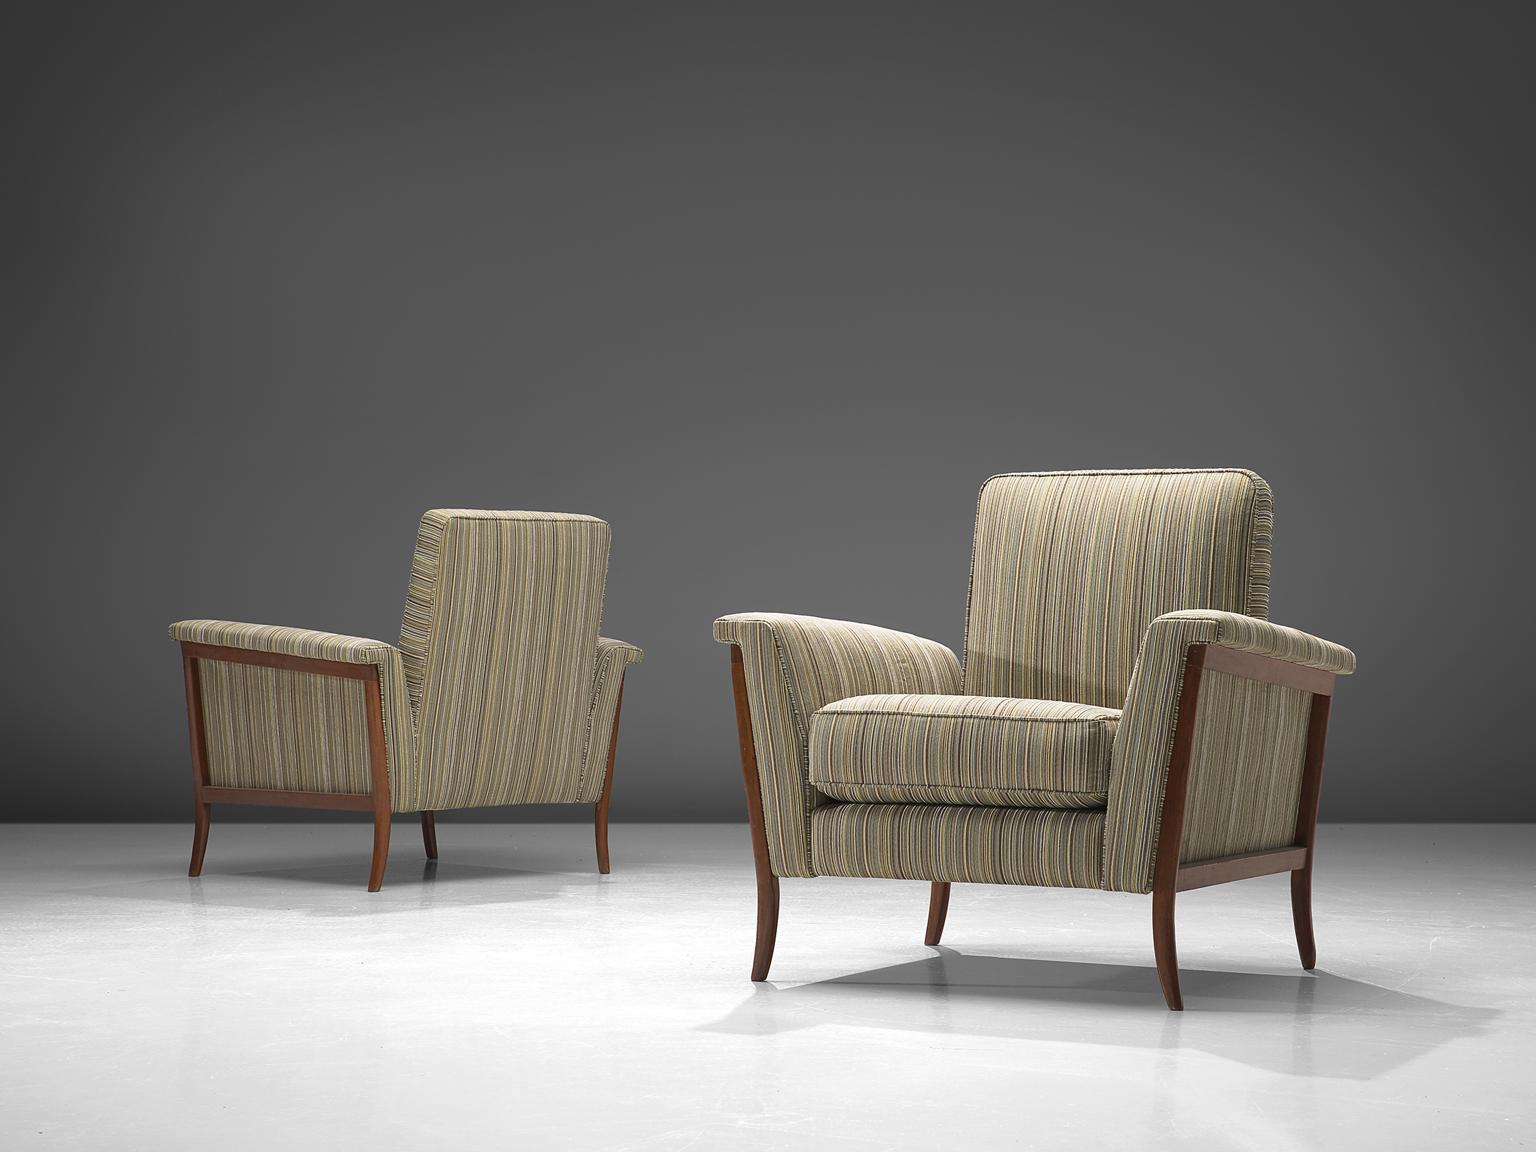 Pair of lounge chairs, in mahogany and fabric, Brazil, 1960s.

Elegant pair of Brazilian club chairs. The curved frame is made of mahogany and beautifully exposed on the outside of the shell. Due the lines the wide character of this chair is